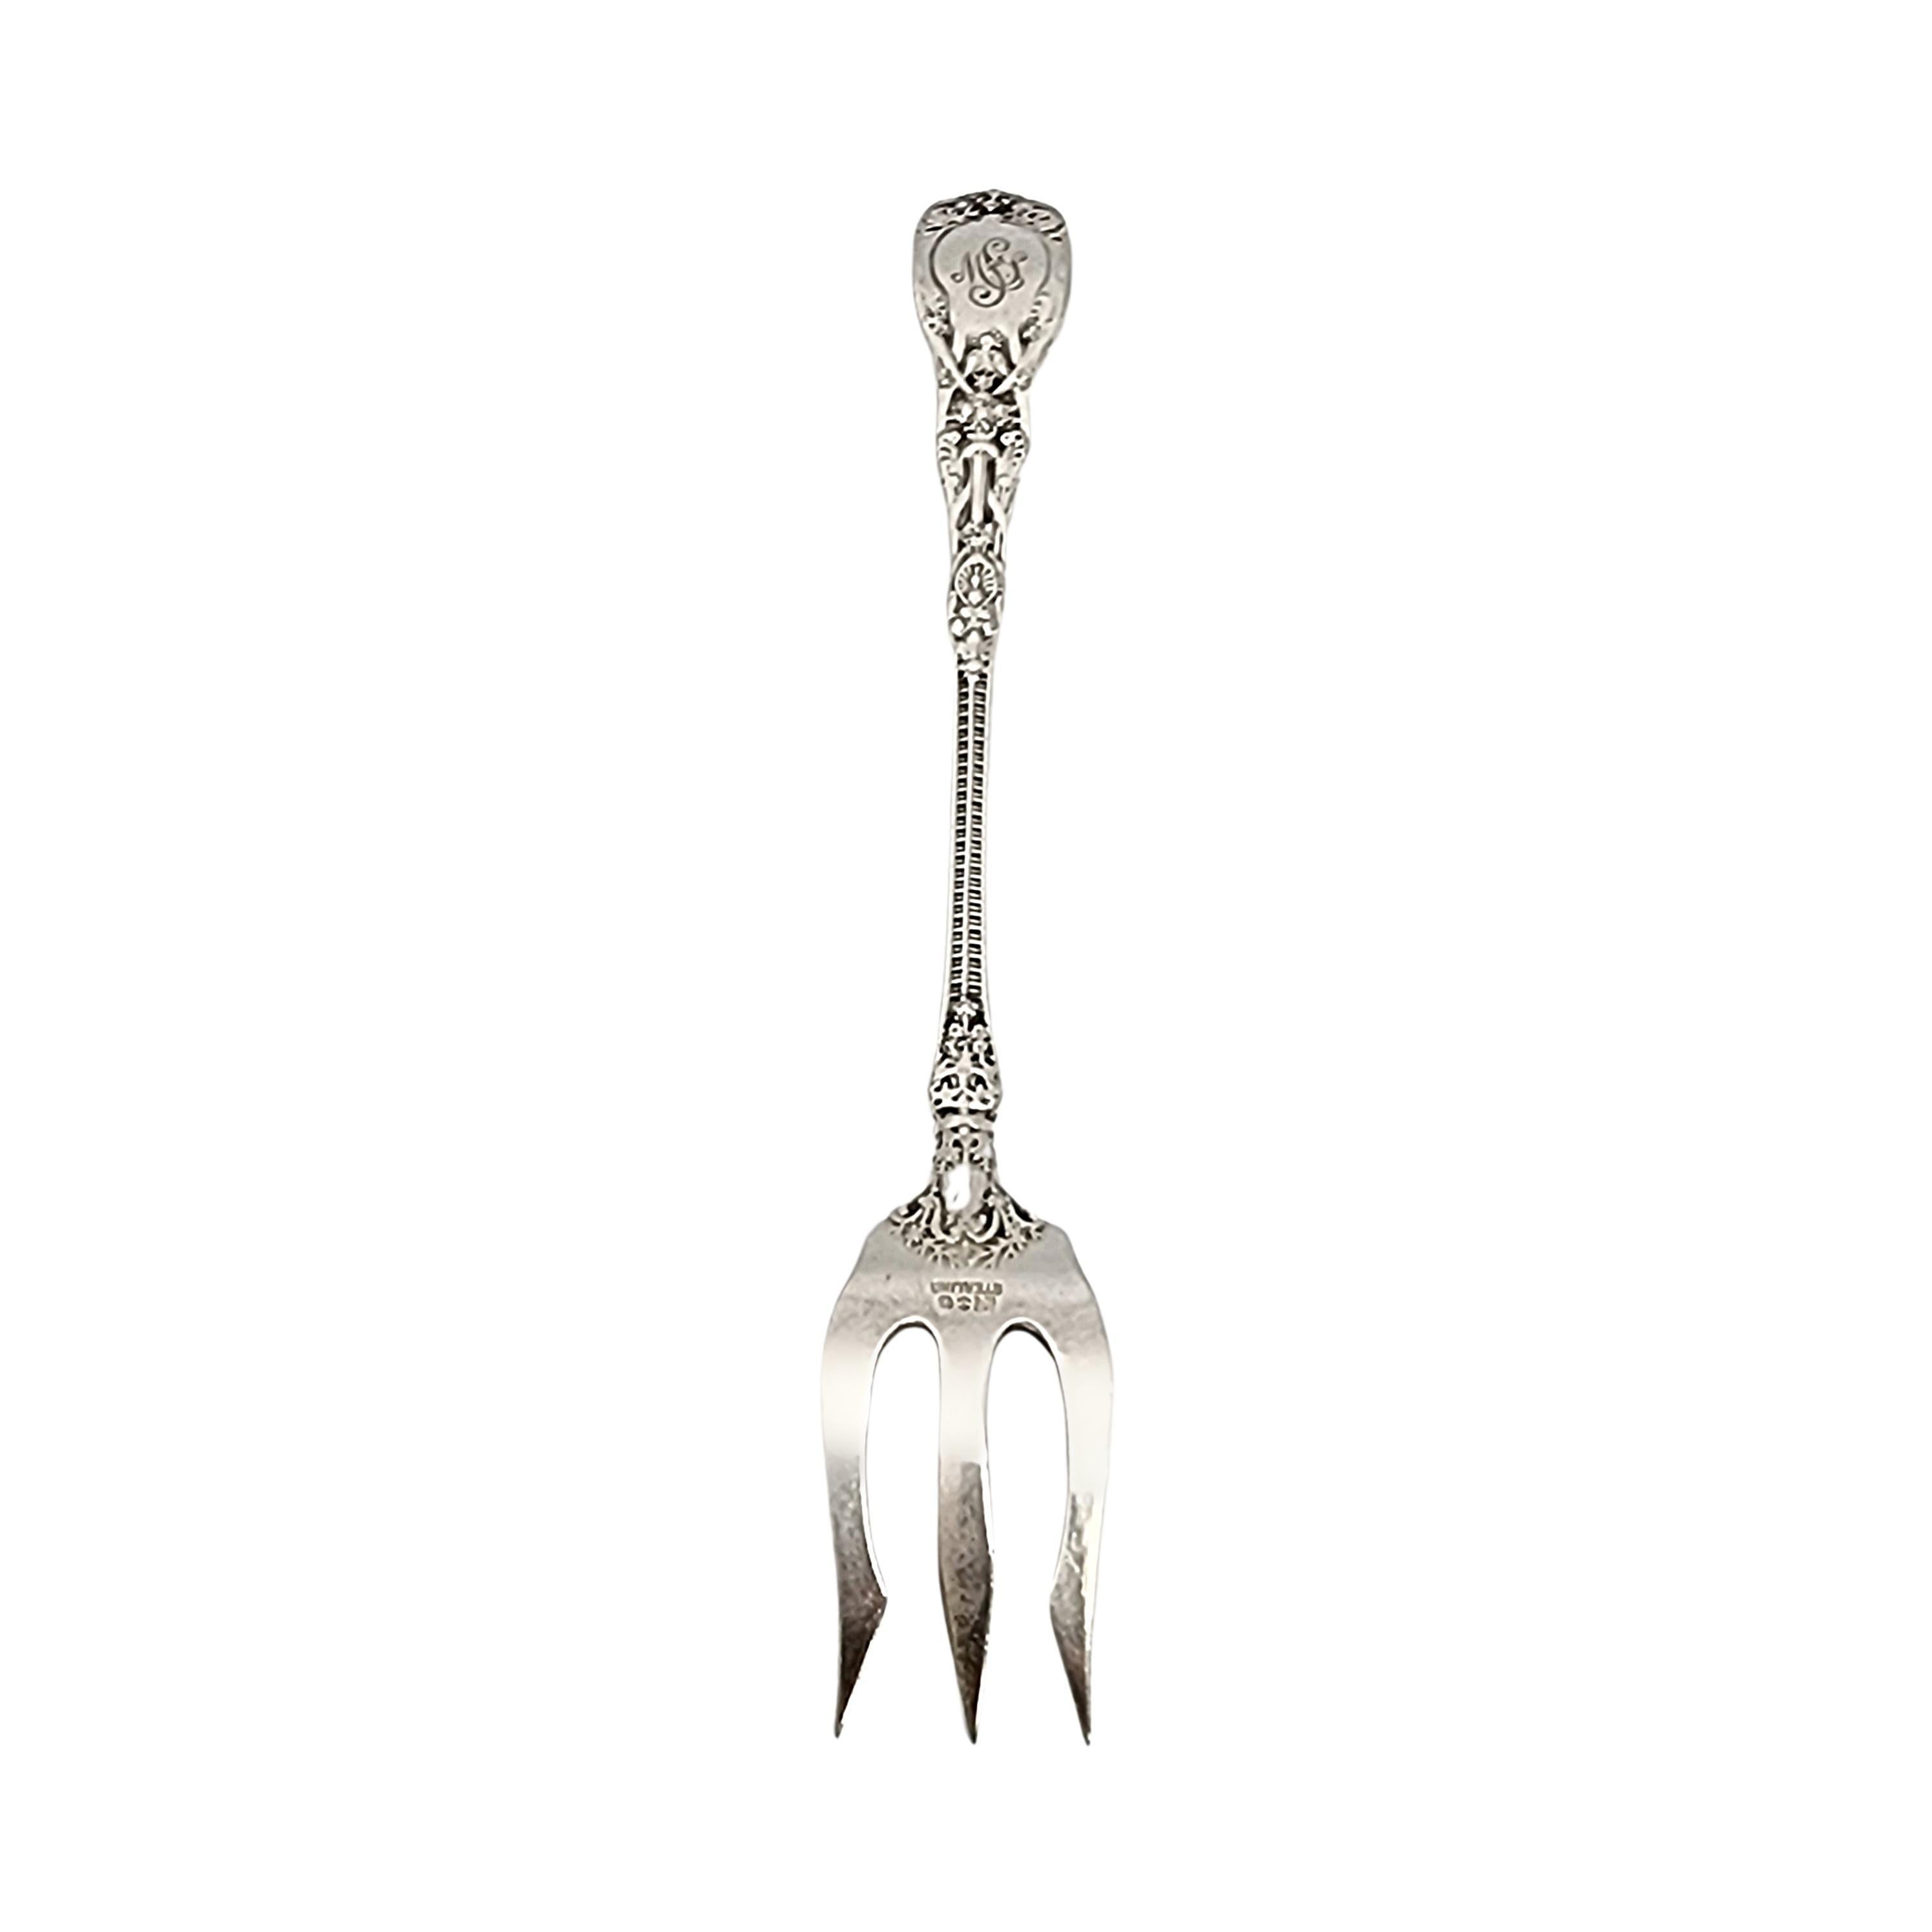 Antique sterling silver olive fork in the Mythologique pattern by Gorham.

Monogram appears to be MSJ (see photo).

Designed by F. Antoine Heller in 1894, Gorham's Mythologique pattern is an intricate, multi-motif pattern that ornately depicts